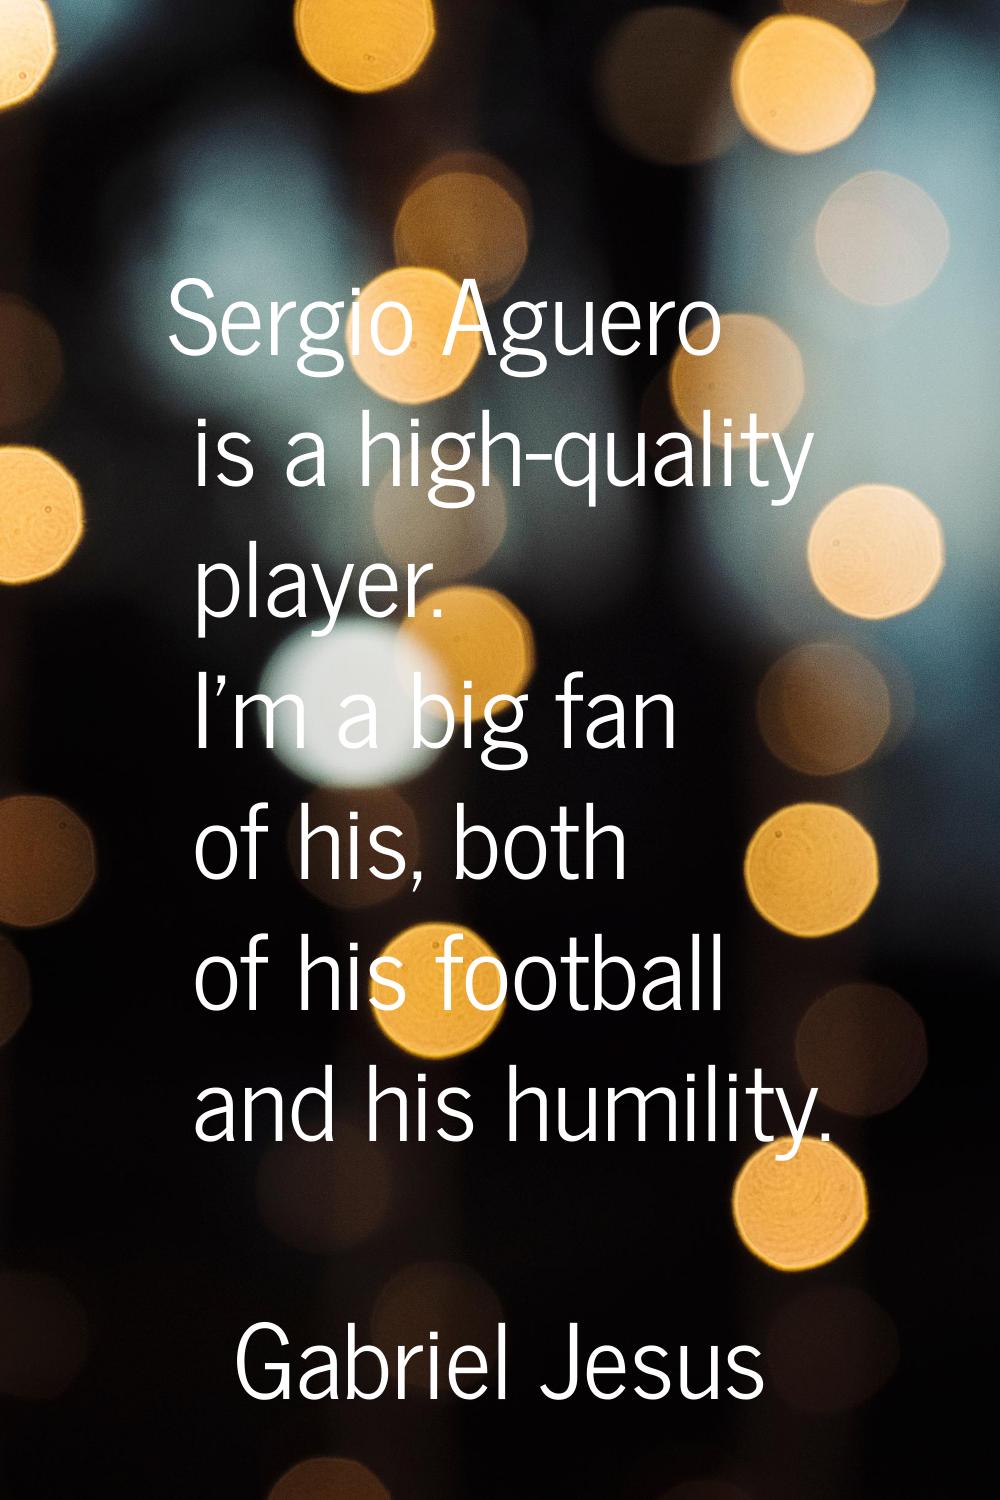 Sergio Aguero is a high-quality player. I'm a big fan of his, both of his football and his humility